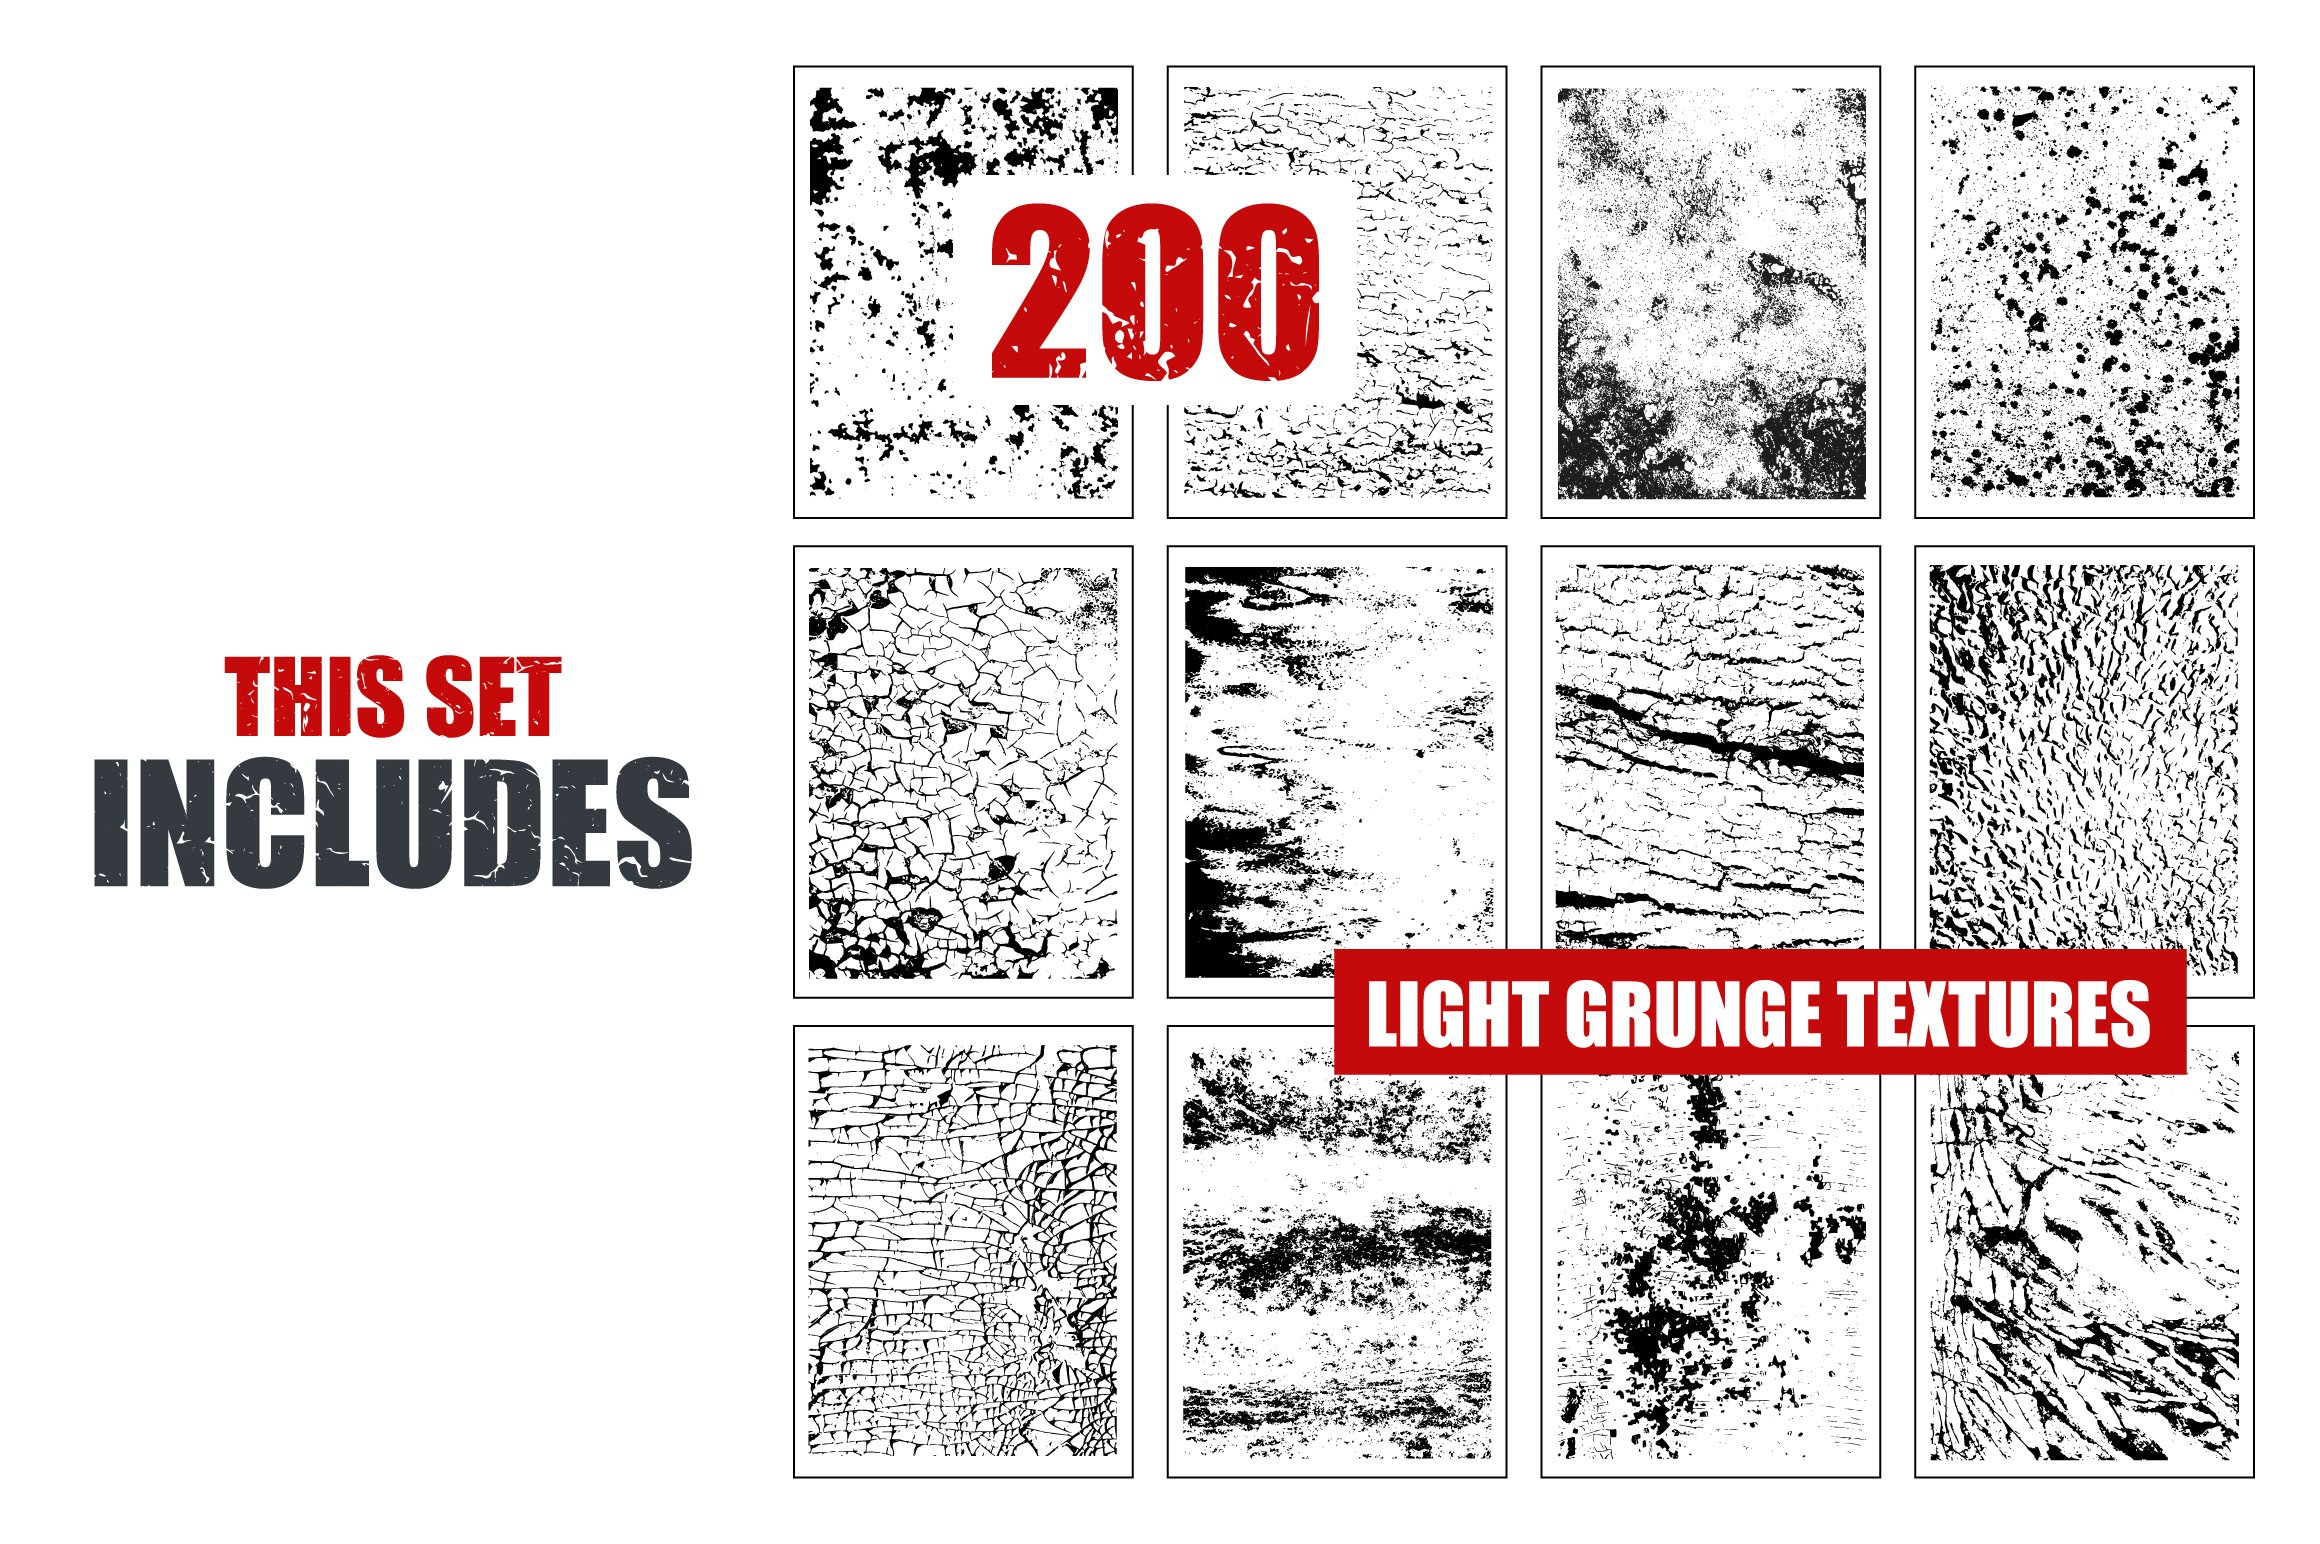 200 Light Grunge Textures cover image.